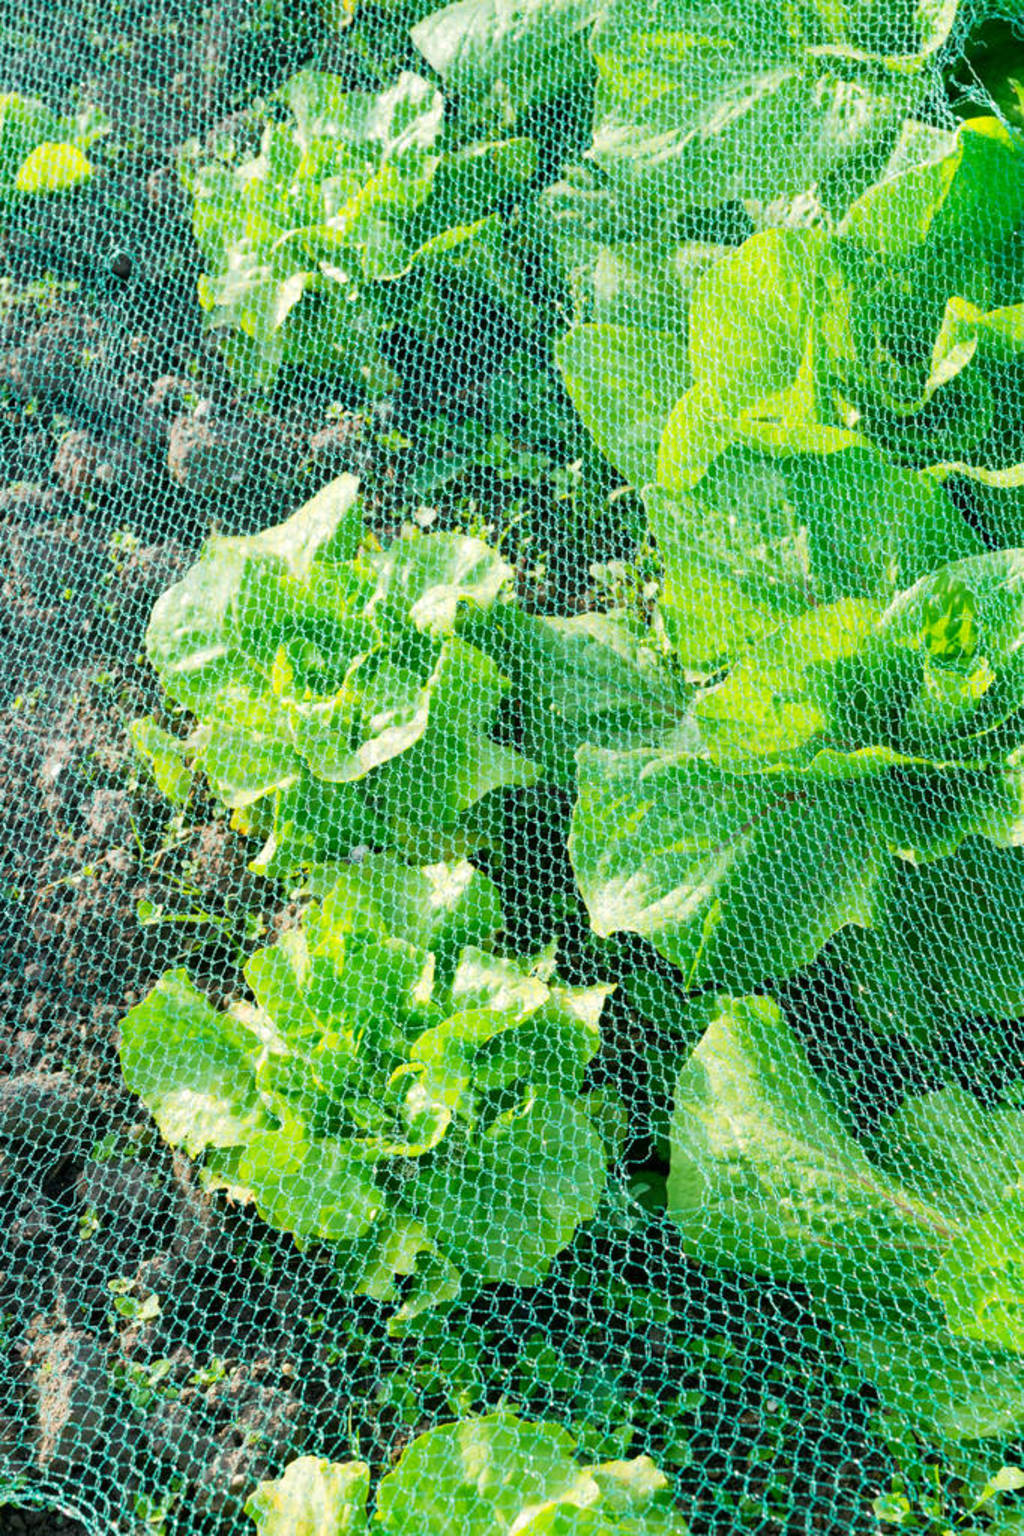 Fresh green lettuce under a protection net